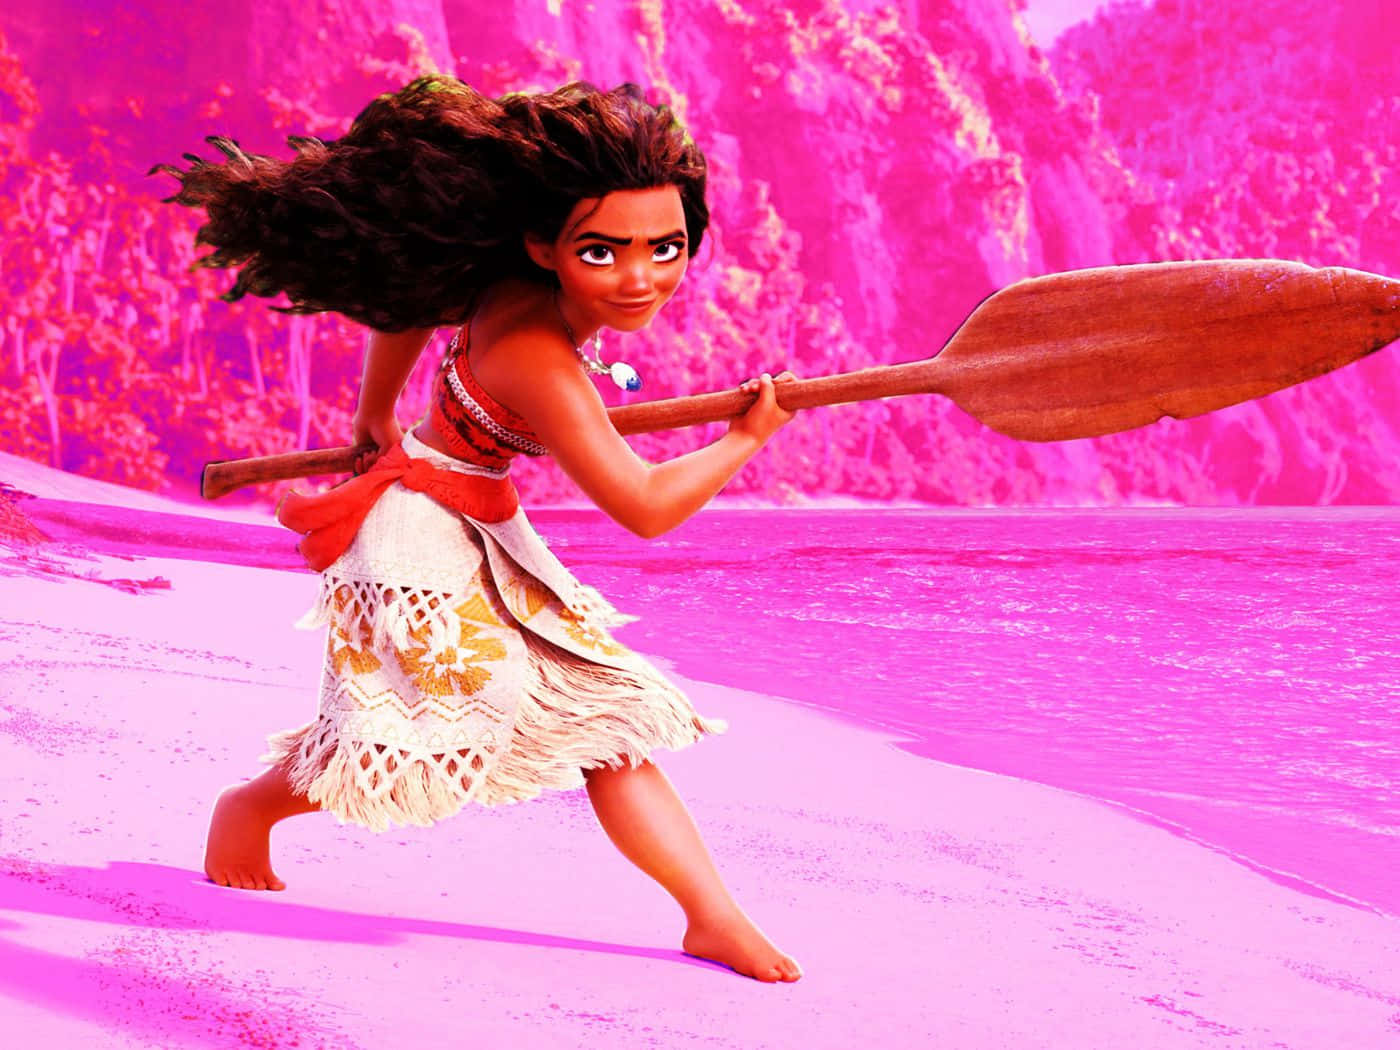 Moana Is Holding A Paddle And Walking On The Beach